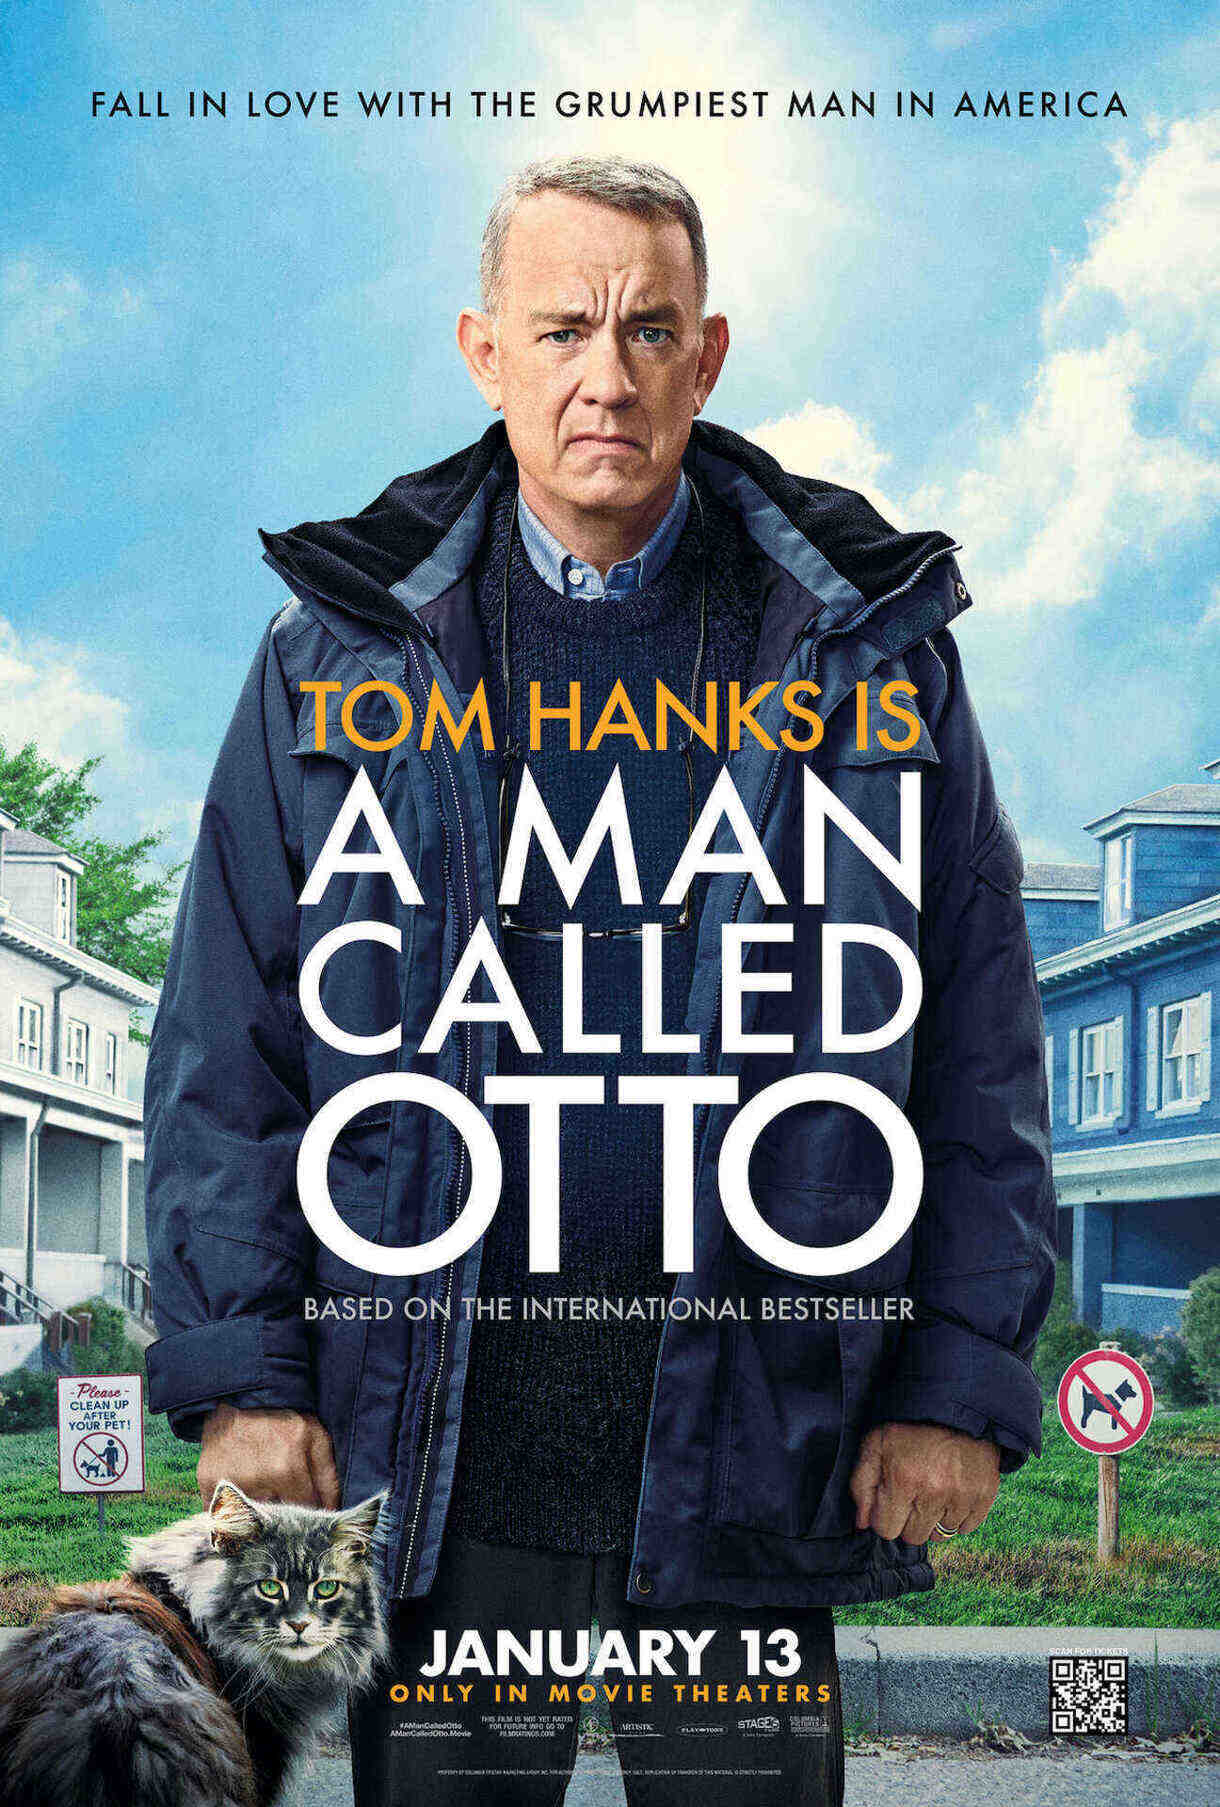 Theatrical poster for A Man Called Otto. Image courtesy of Sony Pictures Entertainment.